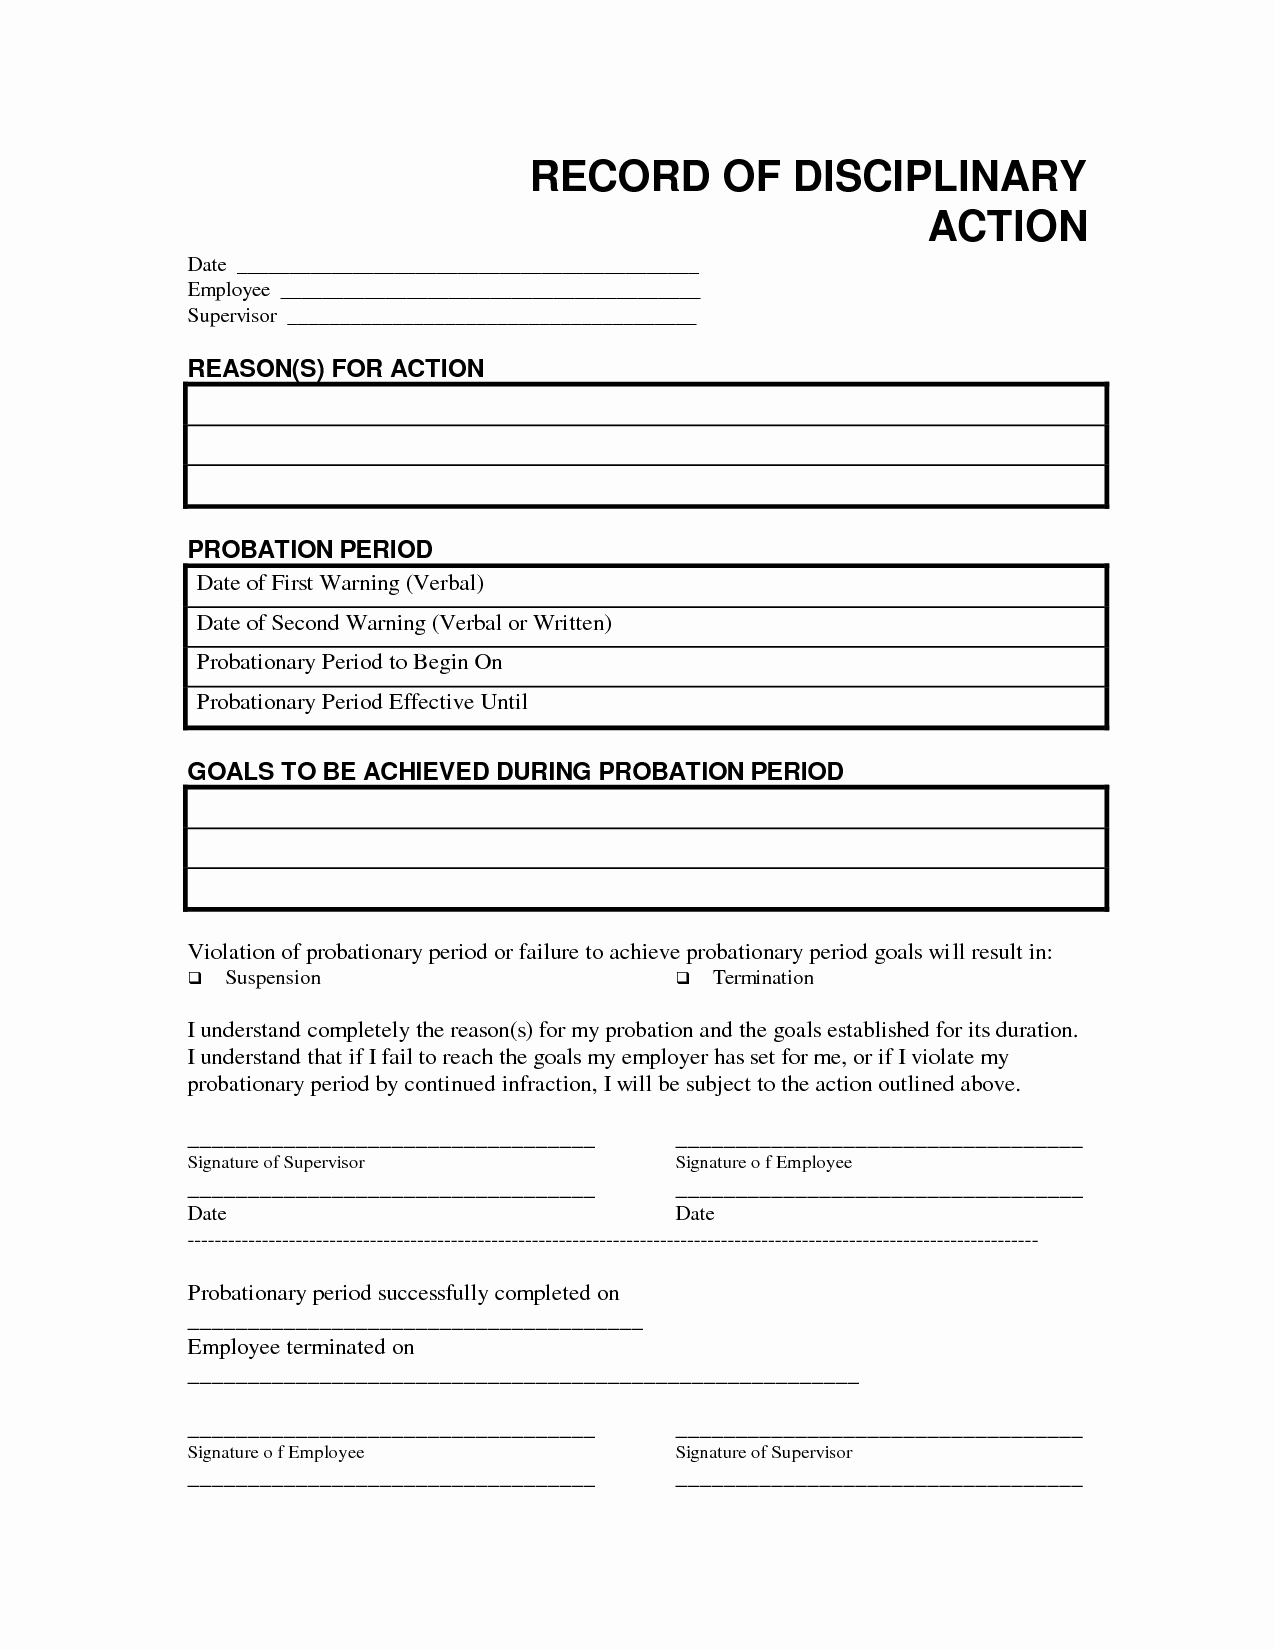 Progressive Discipline Template Best Of Record Disciplinary Action Free Office form Template by